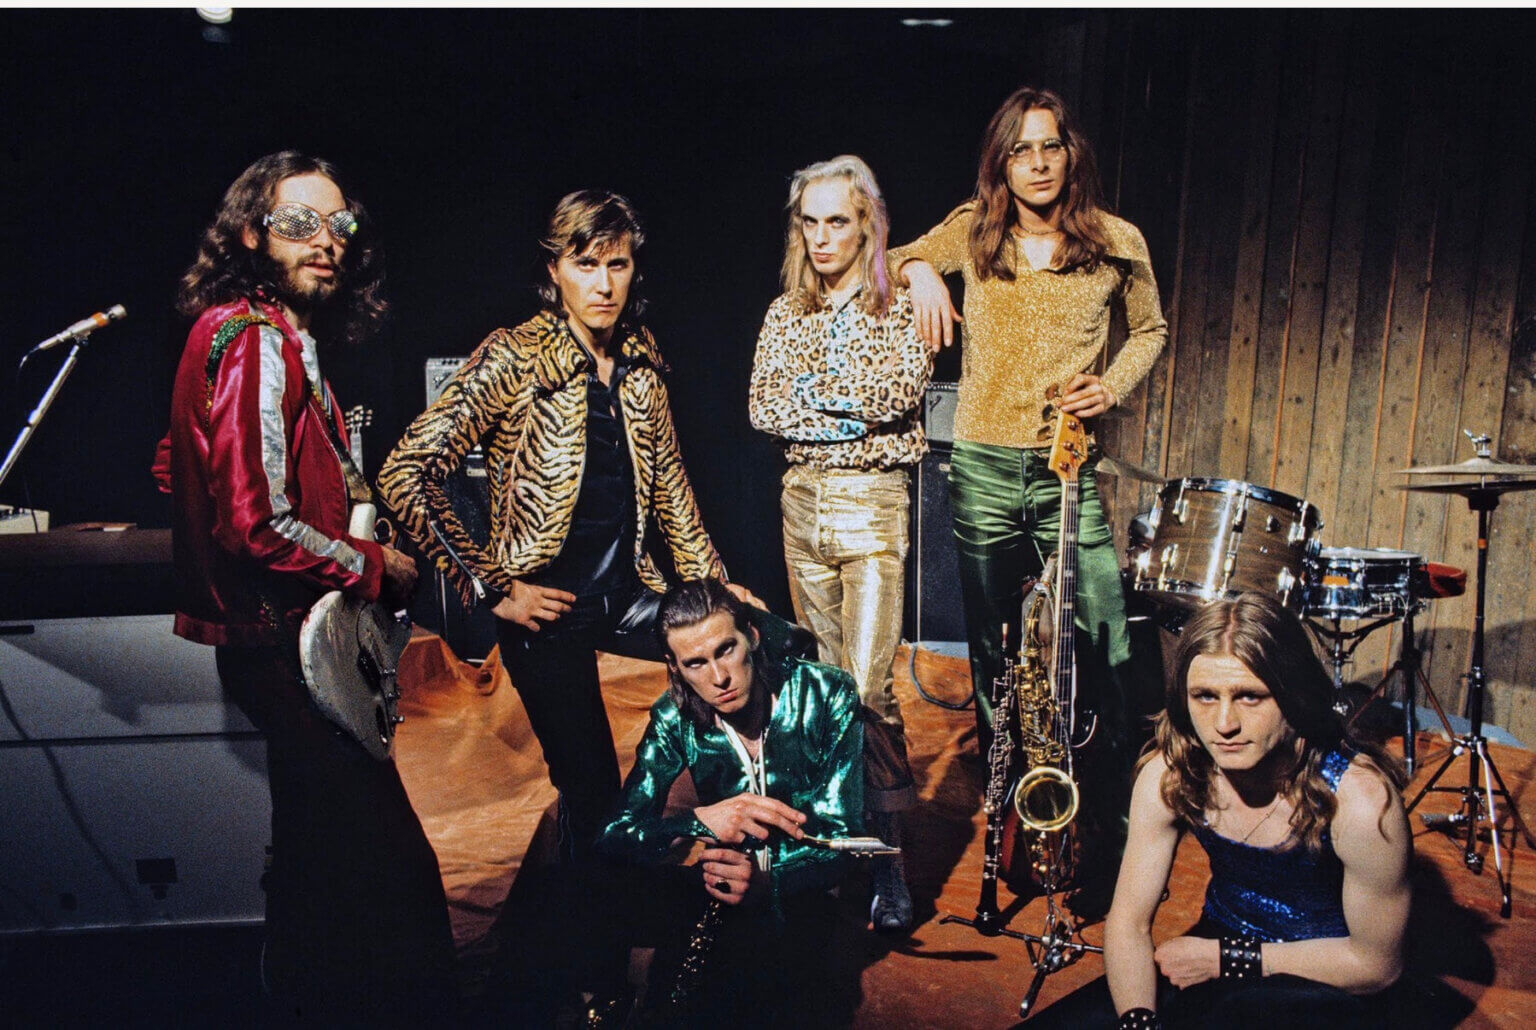 Roxy Music, will tour for the first time in more than a decade to mark the 50th year since their groundbreaking debut album